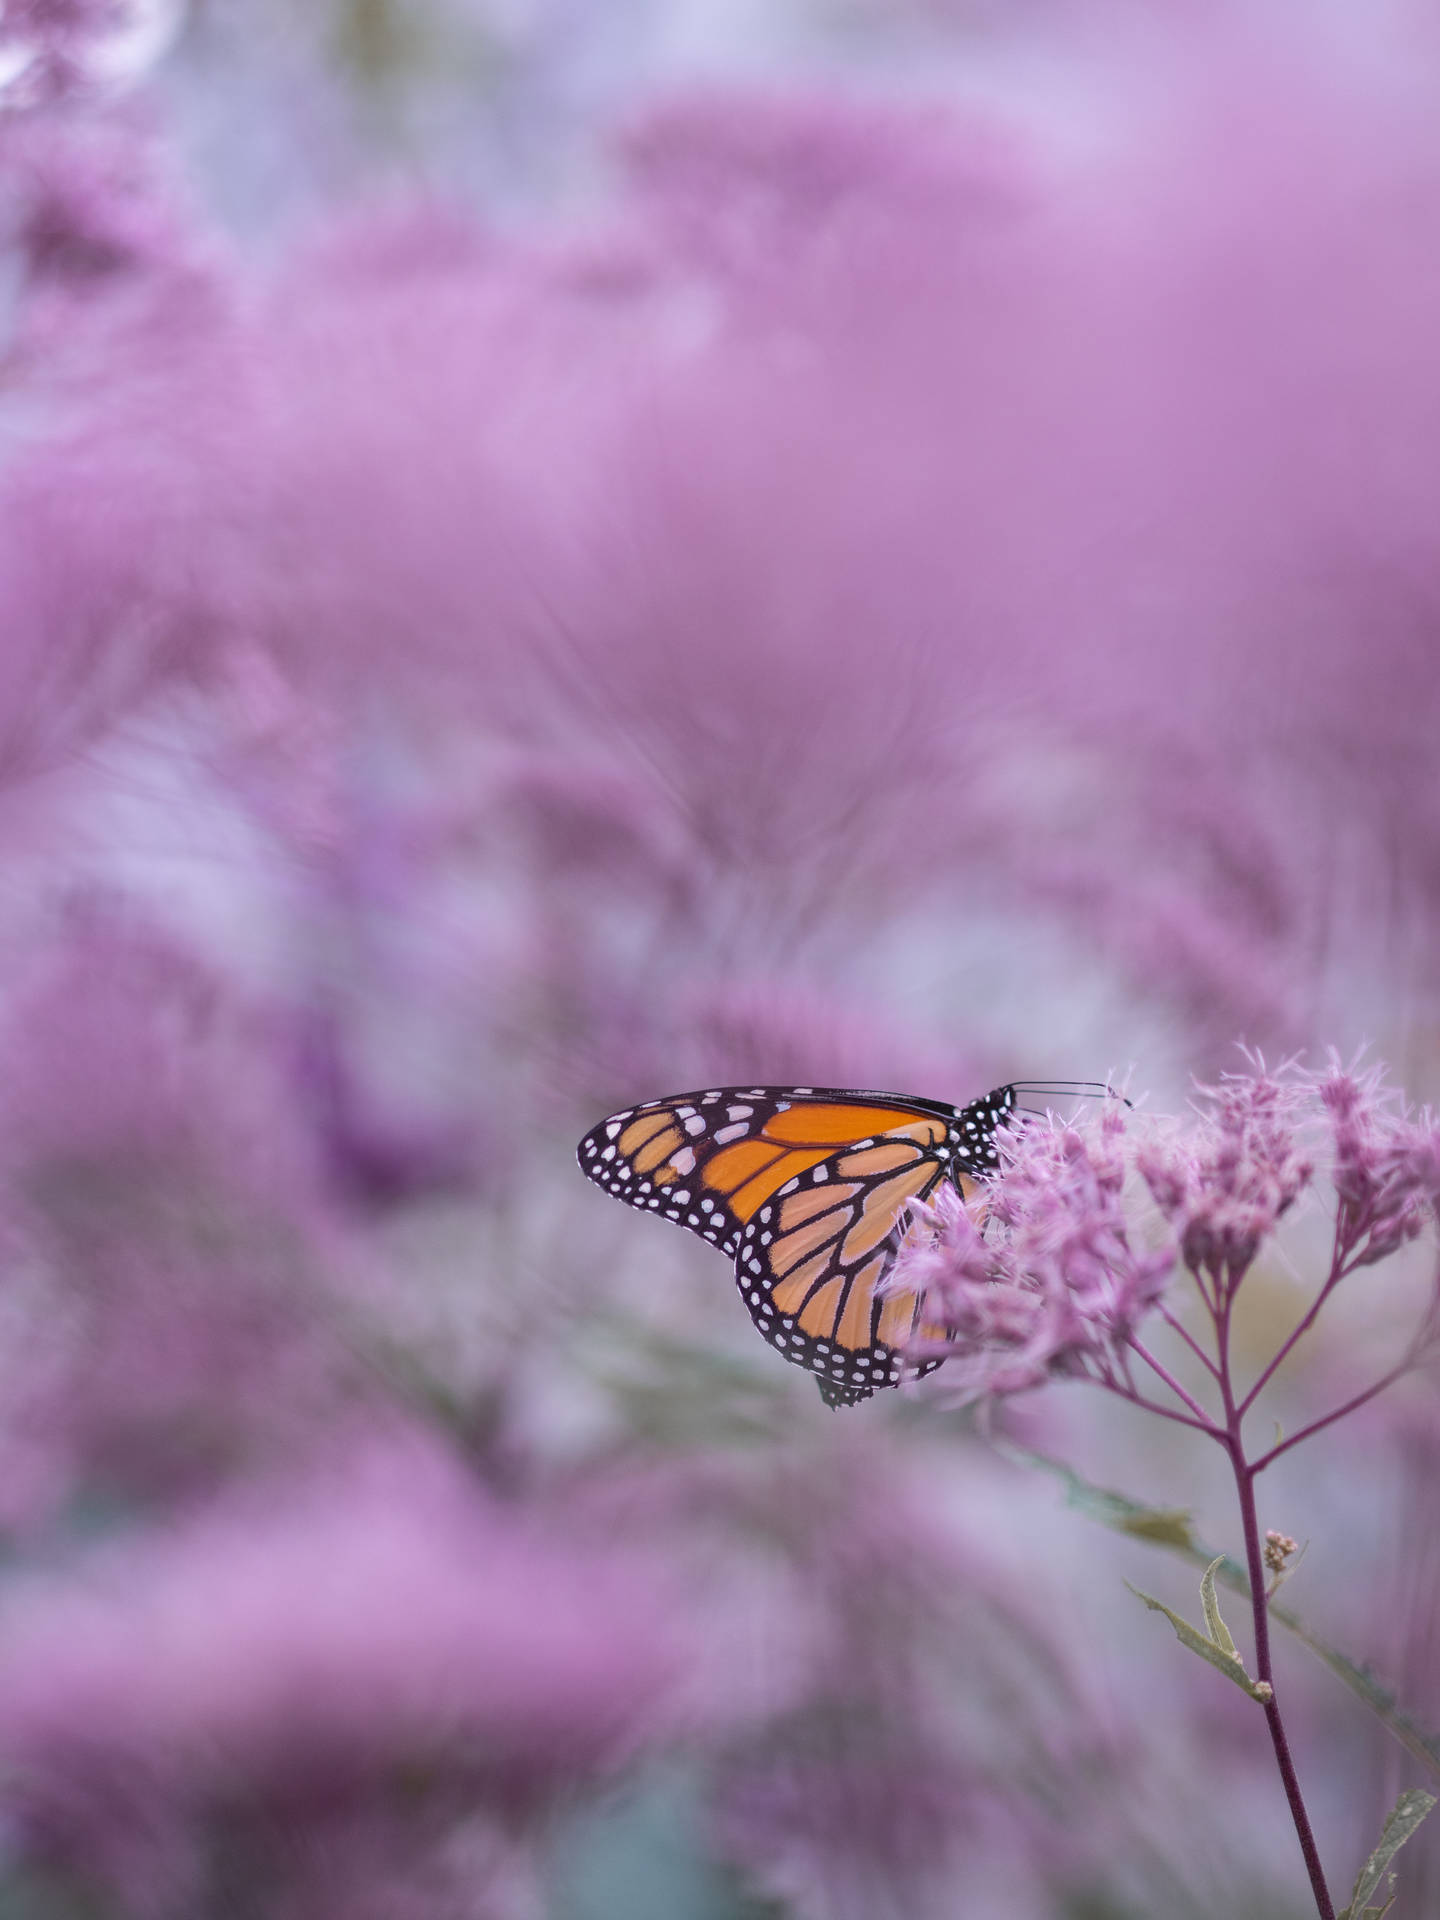 Stunning Close-up Of A Colorful Butterfly Wallpaper